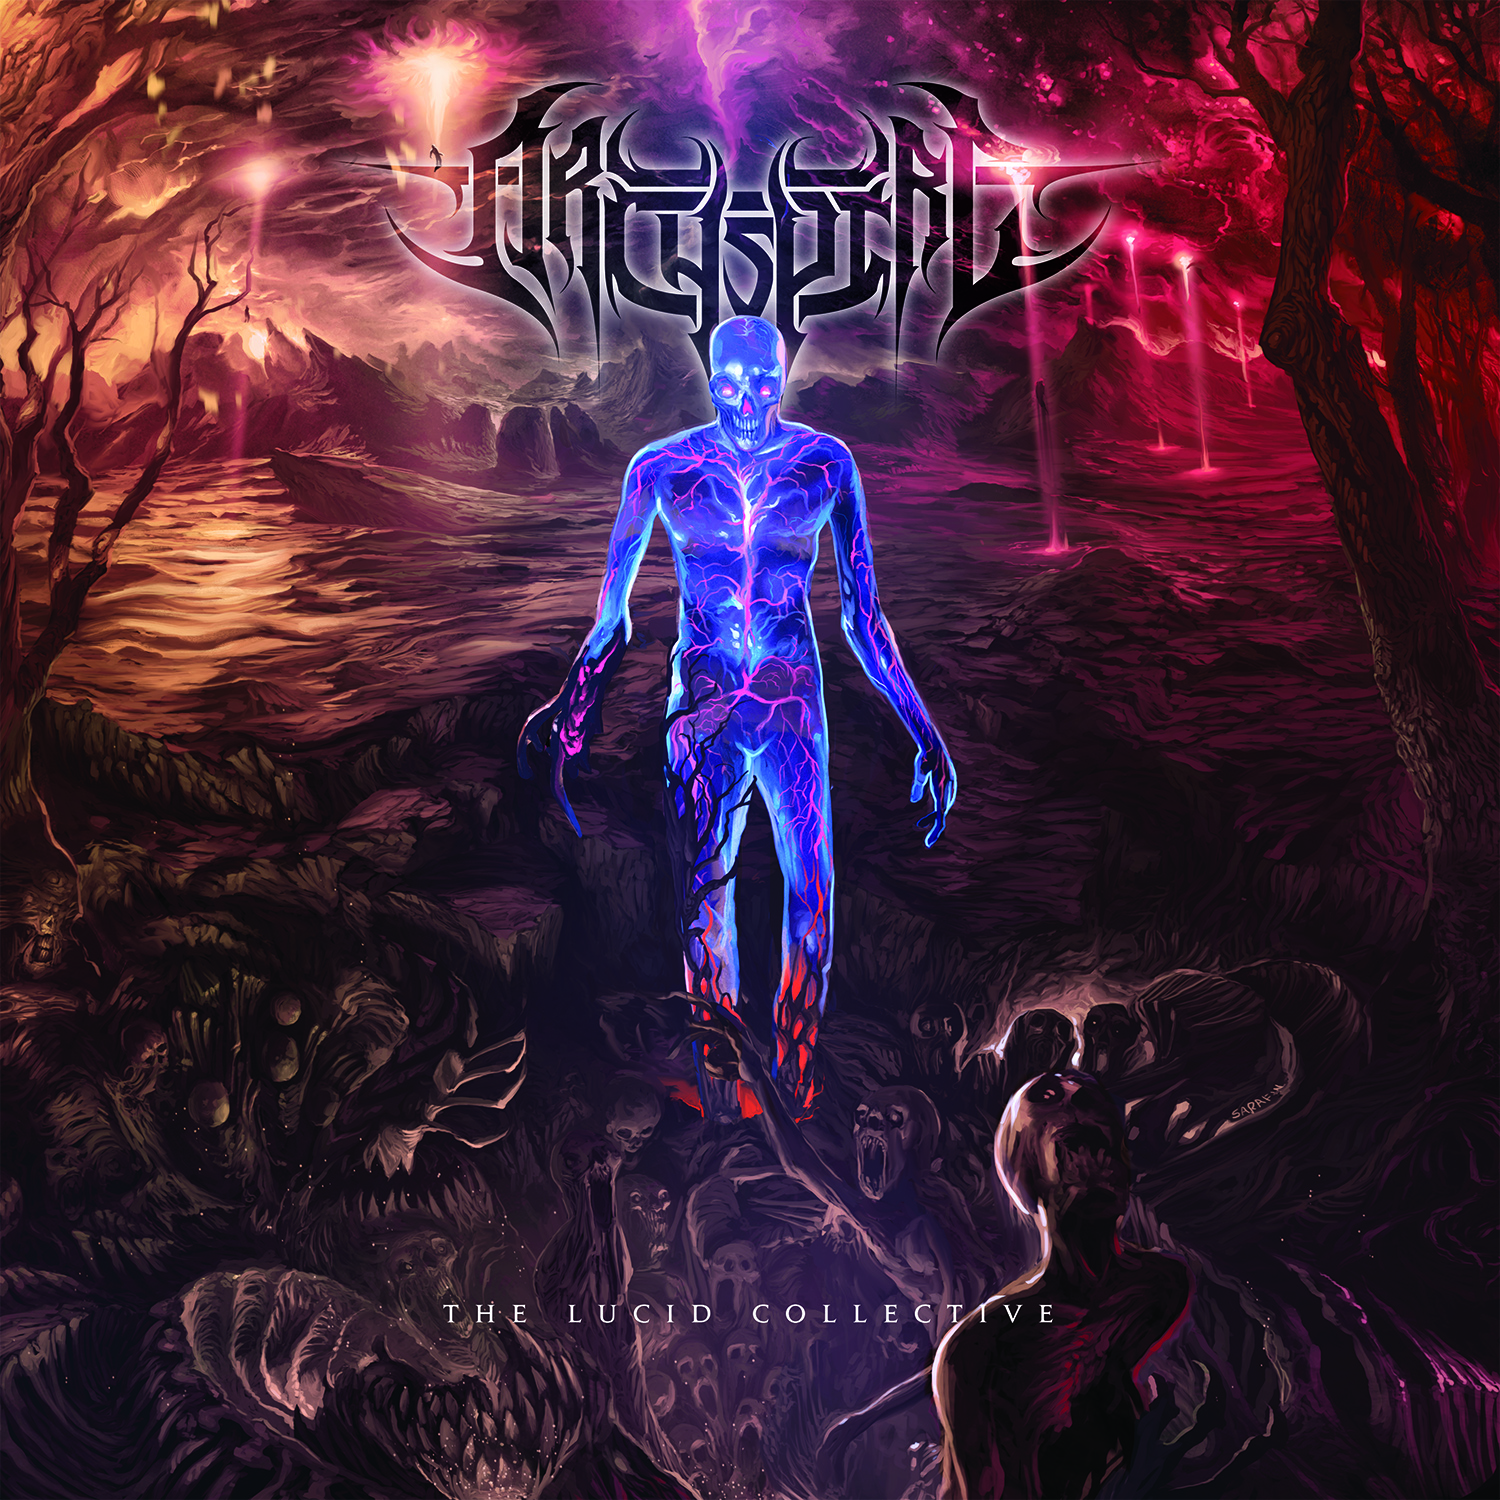 Things You Might Have Missed 2014: Archspire – The Lucid Collective